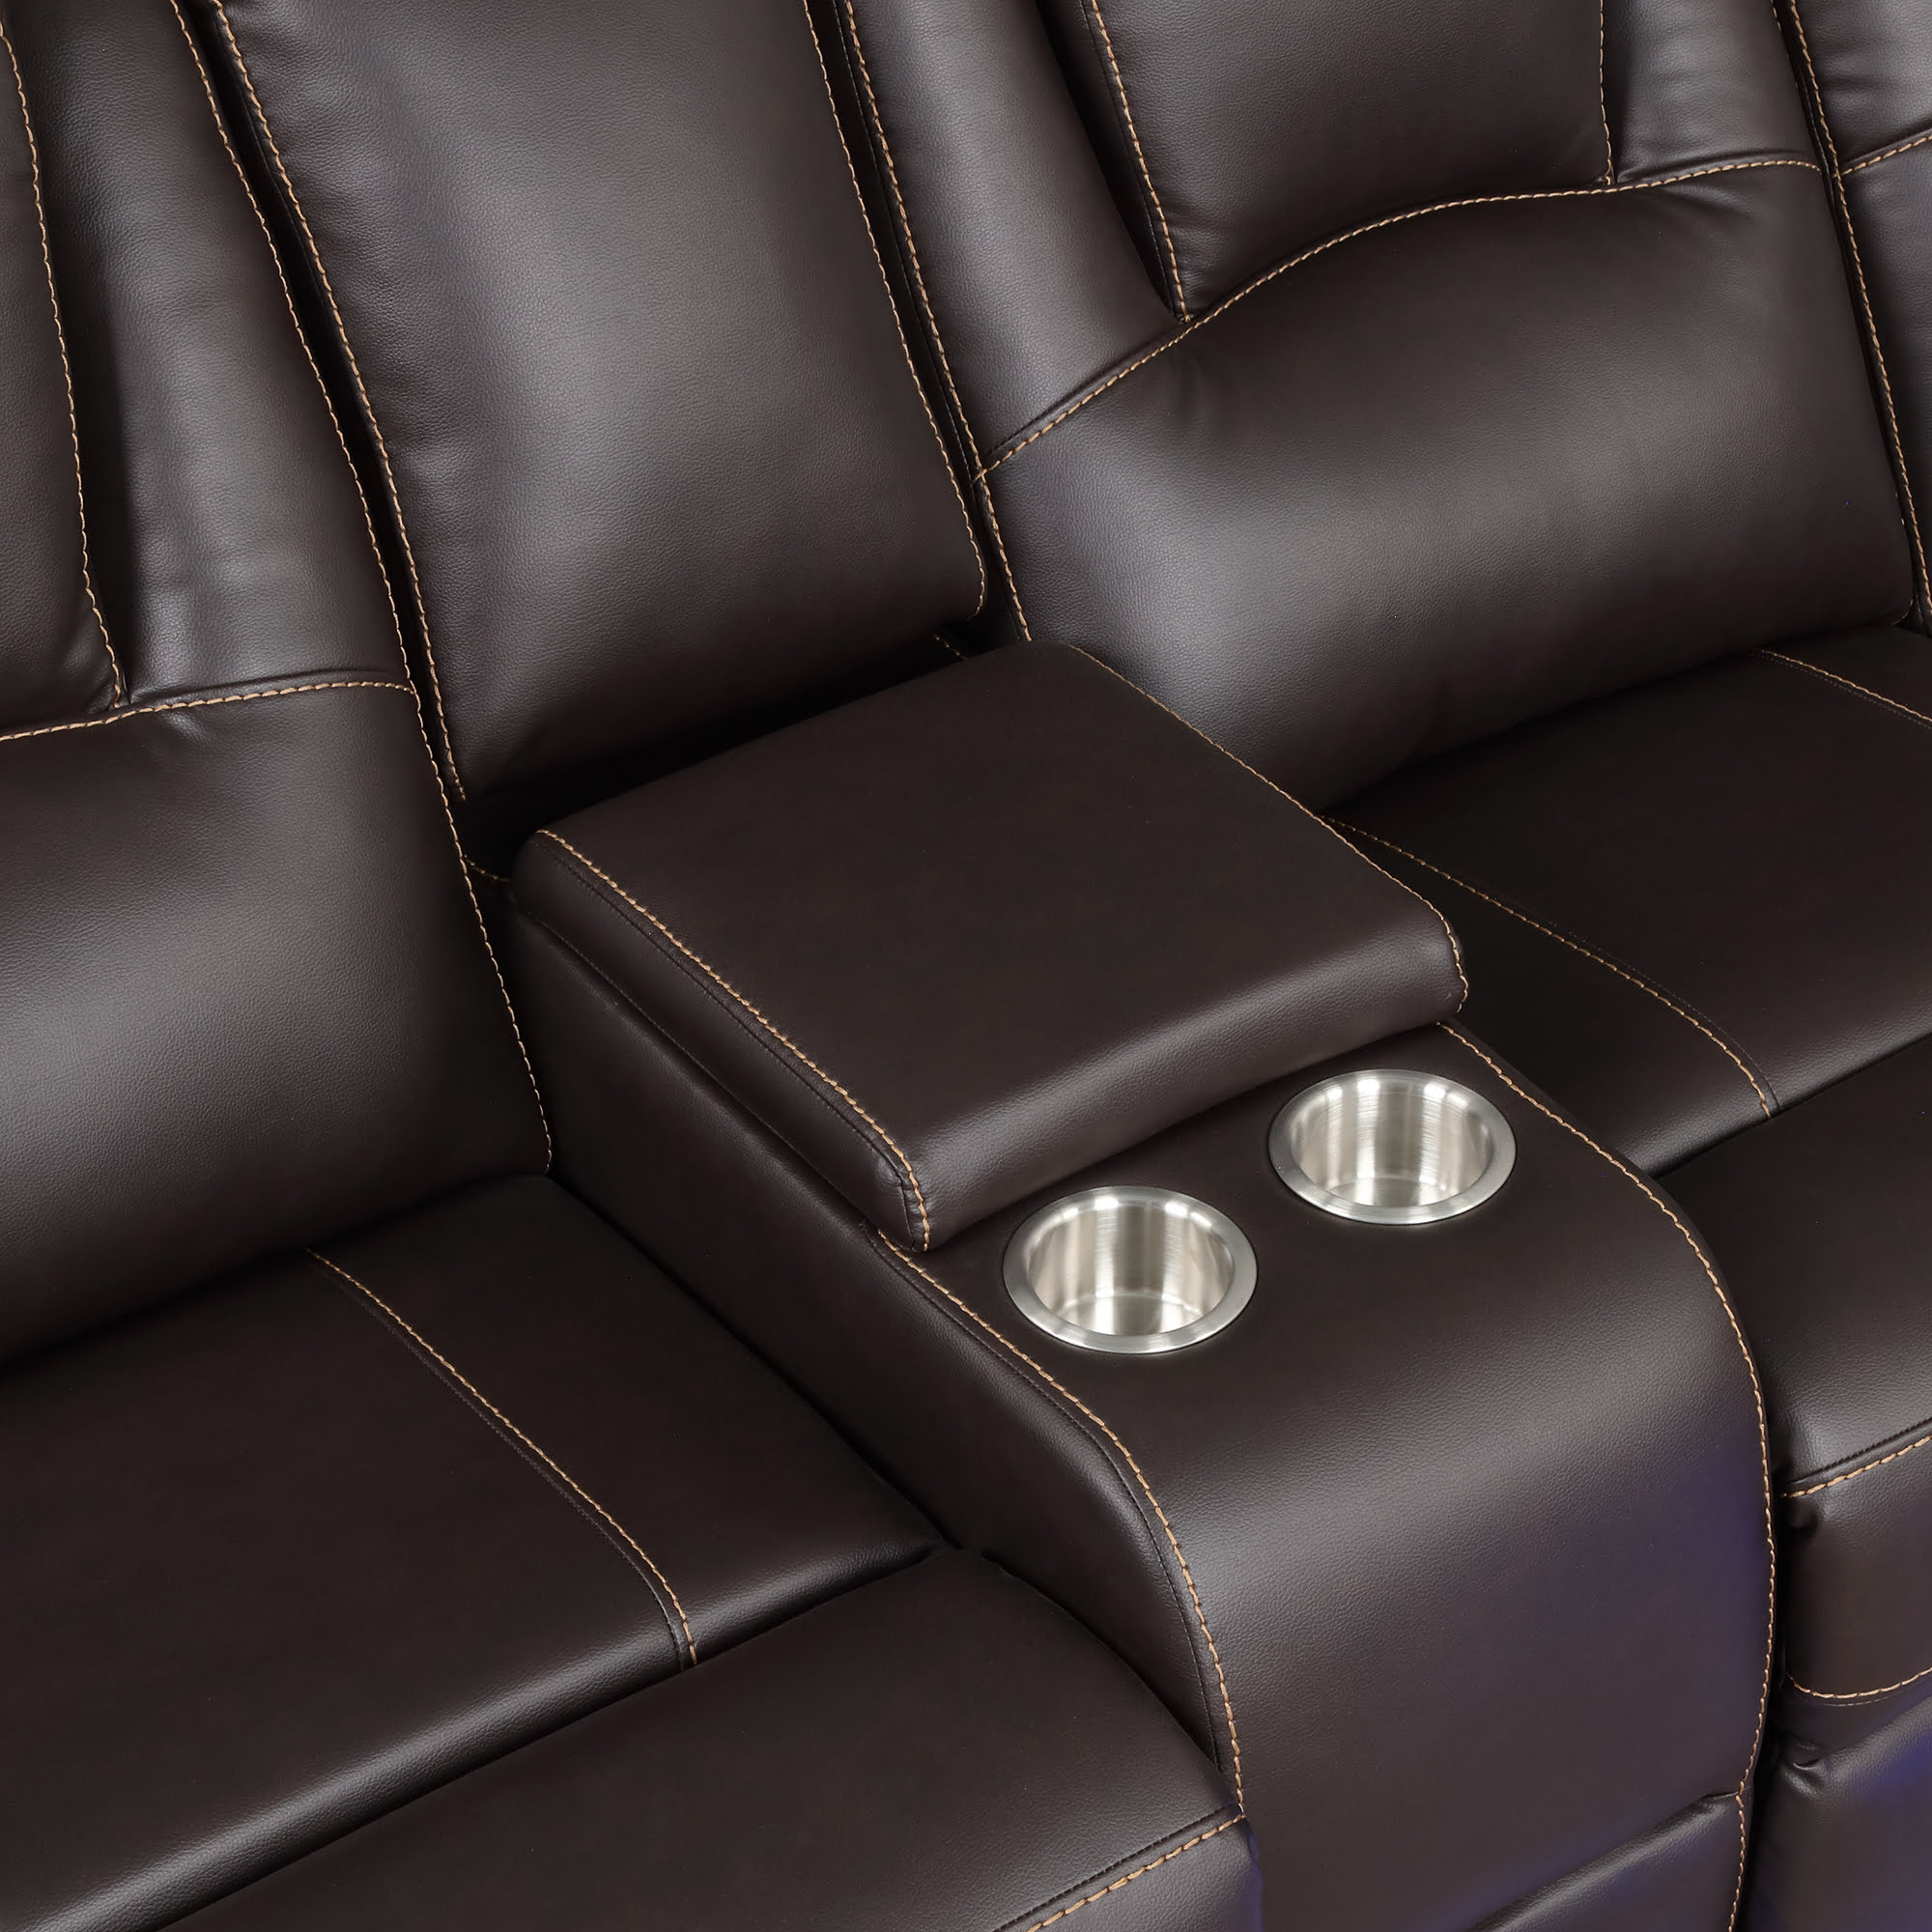 Modern Faux Leather Manual Reclining With Center Console - SG000730AAD